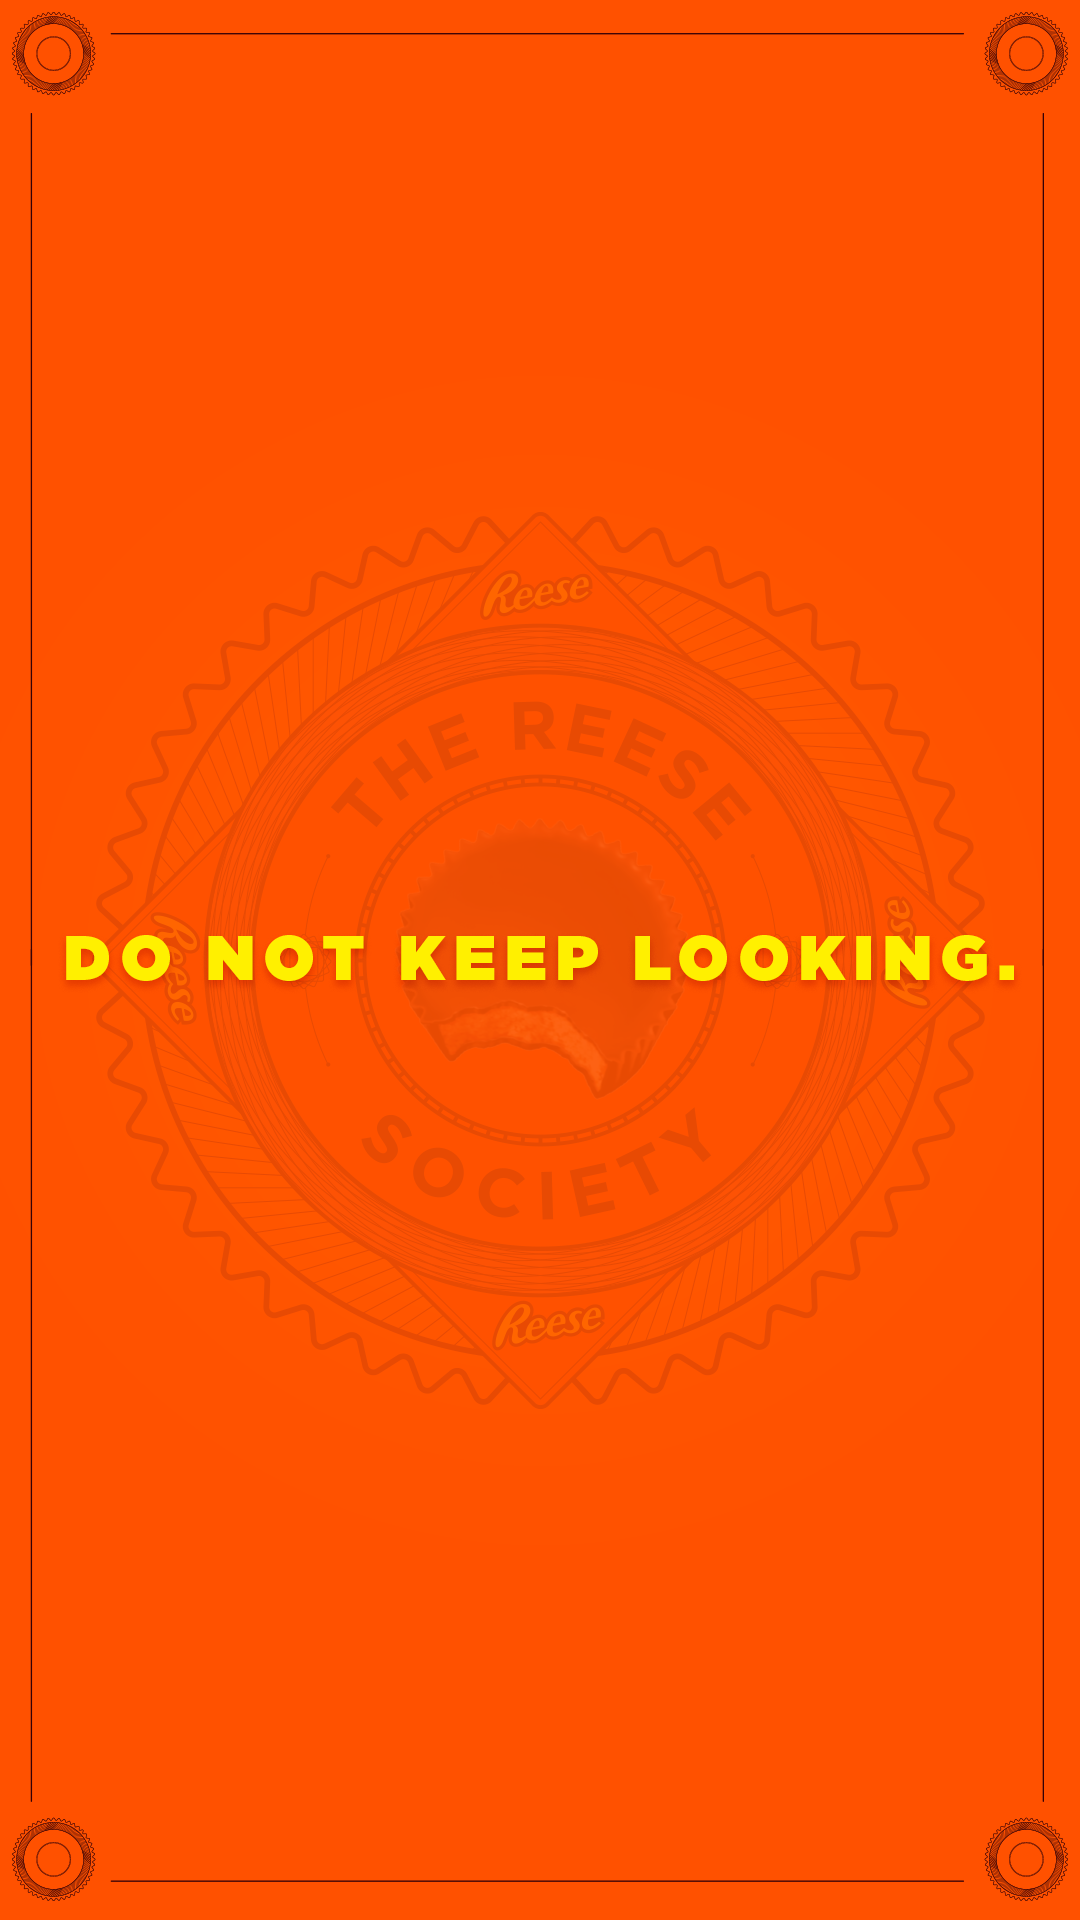 Reese-Society-IG_0096_Do-not-keep-looking.png